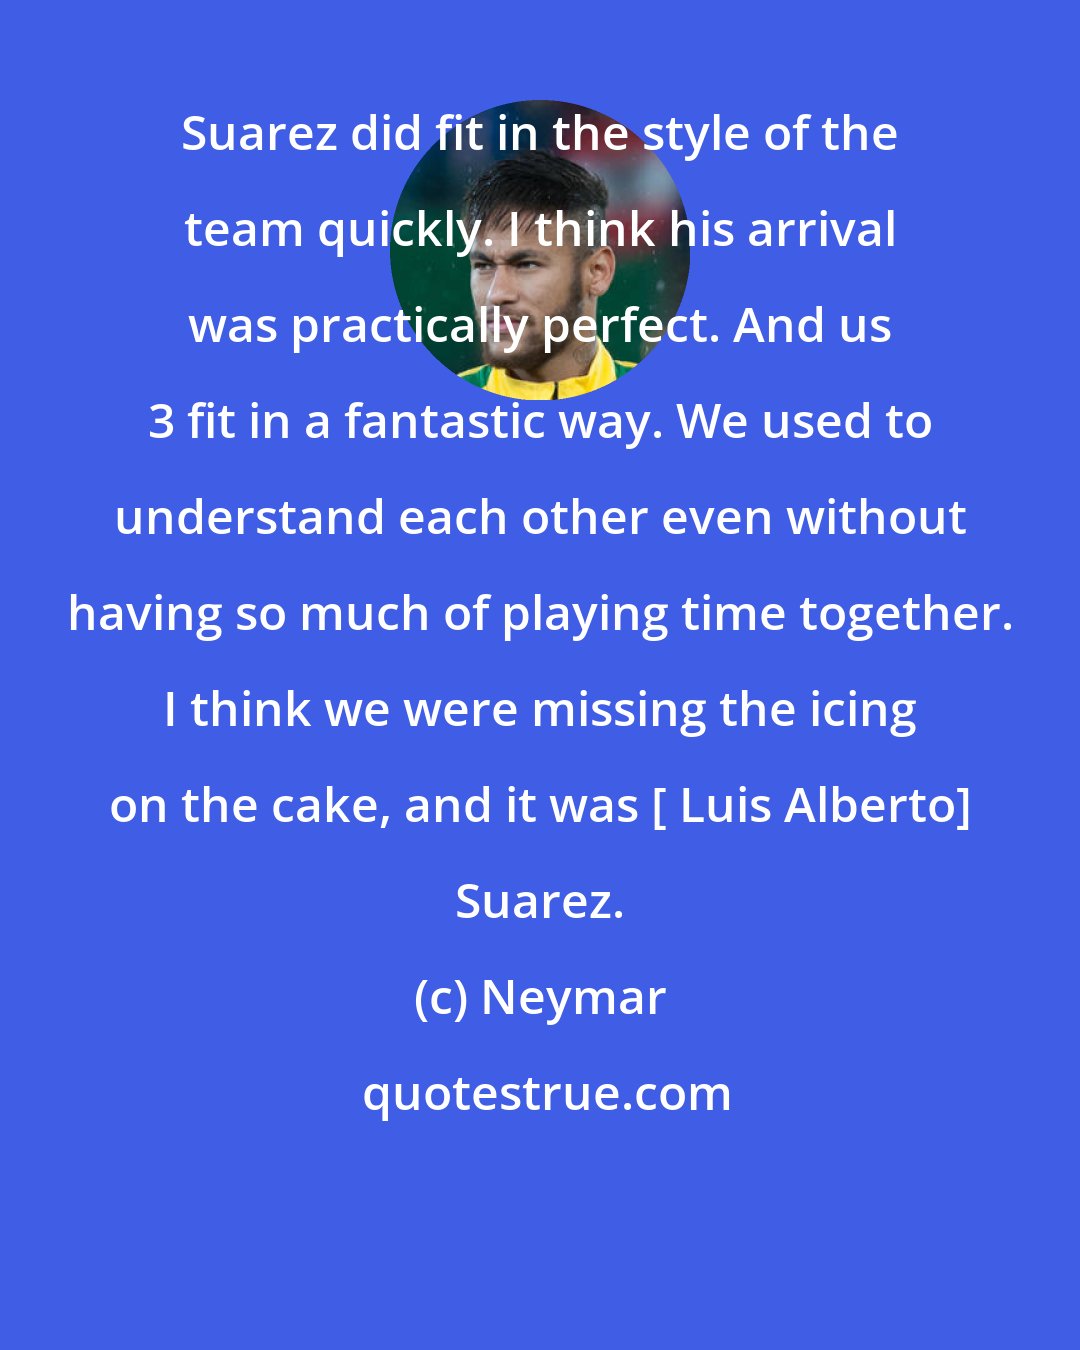 Neymar: Suarez did fit in the style of the team quickly. I think his arrival was practically perfect. And us 3 fit in a fantastic way. We used to understand each other even without having so much of playing time together. I think we were missing the icing on the cake, and it was [ Luis Alberto] Suarez.